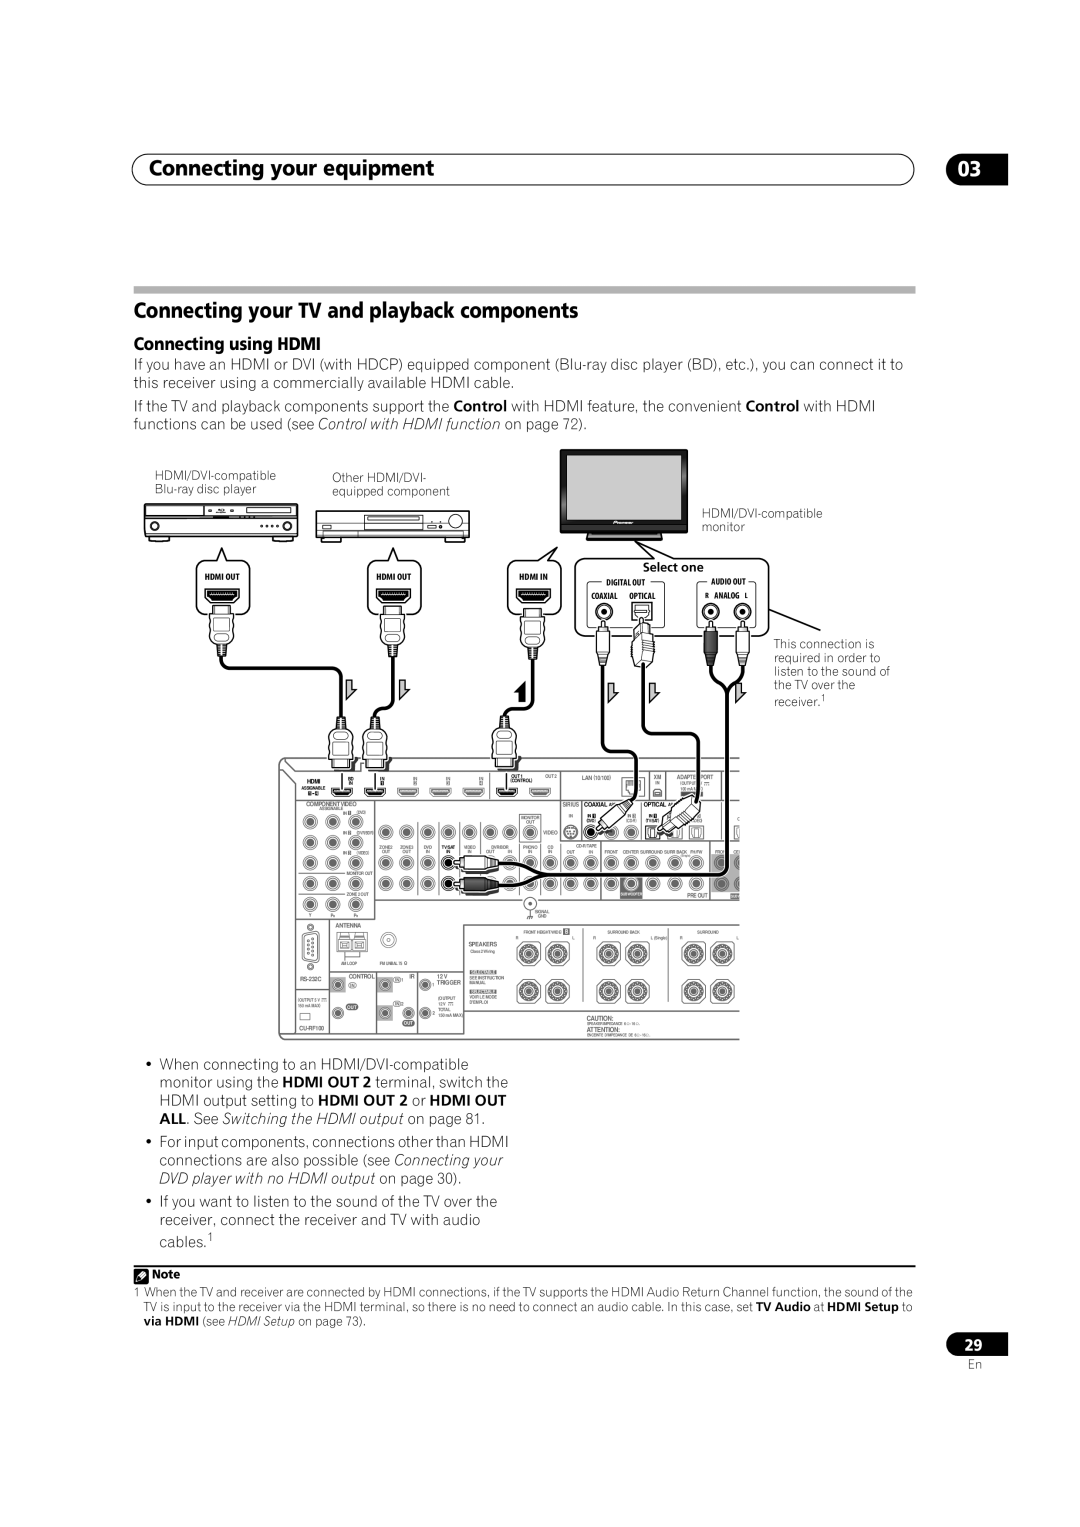 Pioneer SC-35 manual Connecting your TV and playback components, Connecting using HDMI, Connecting your equipment 